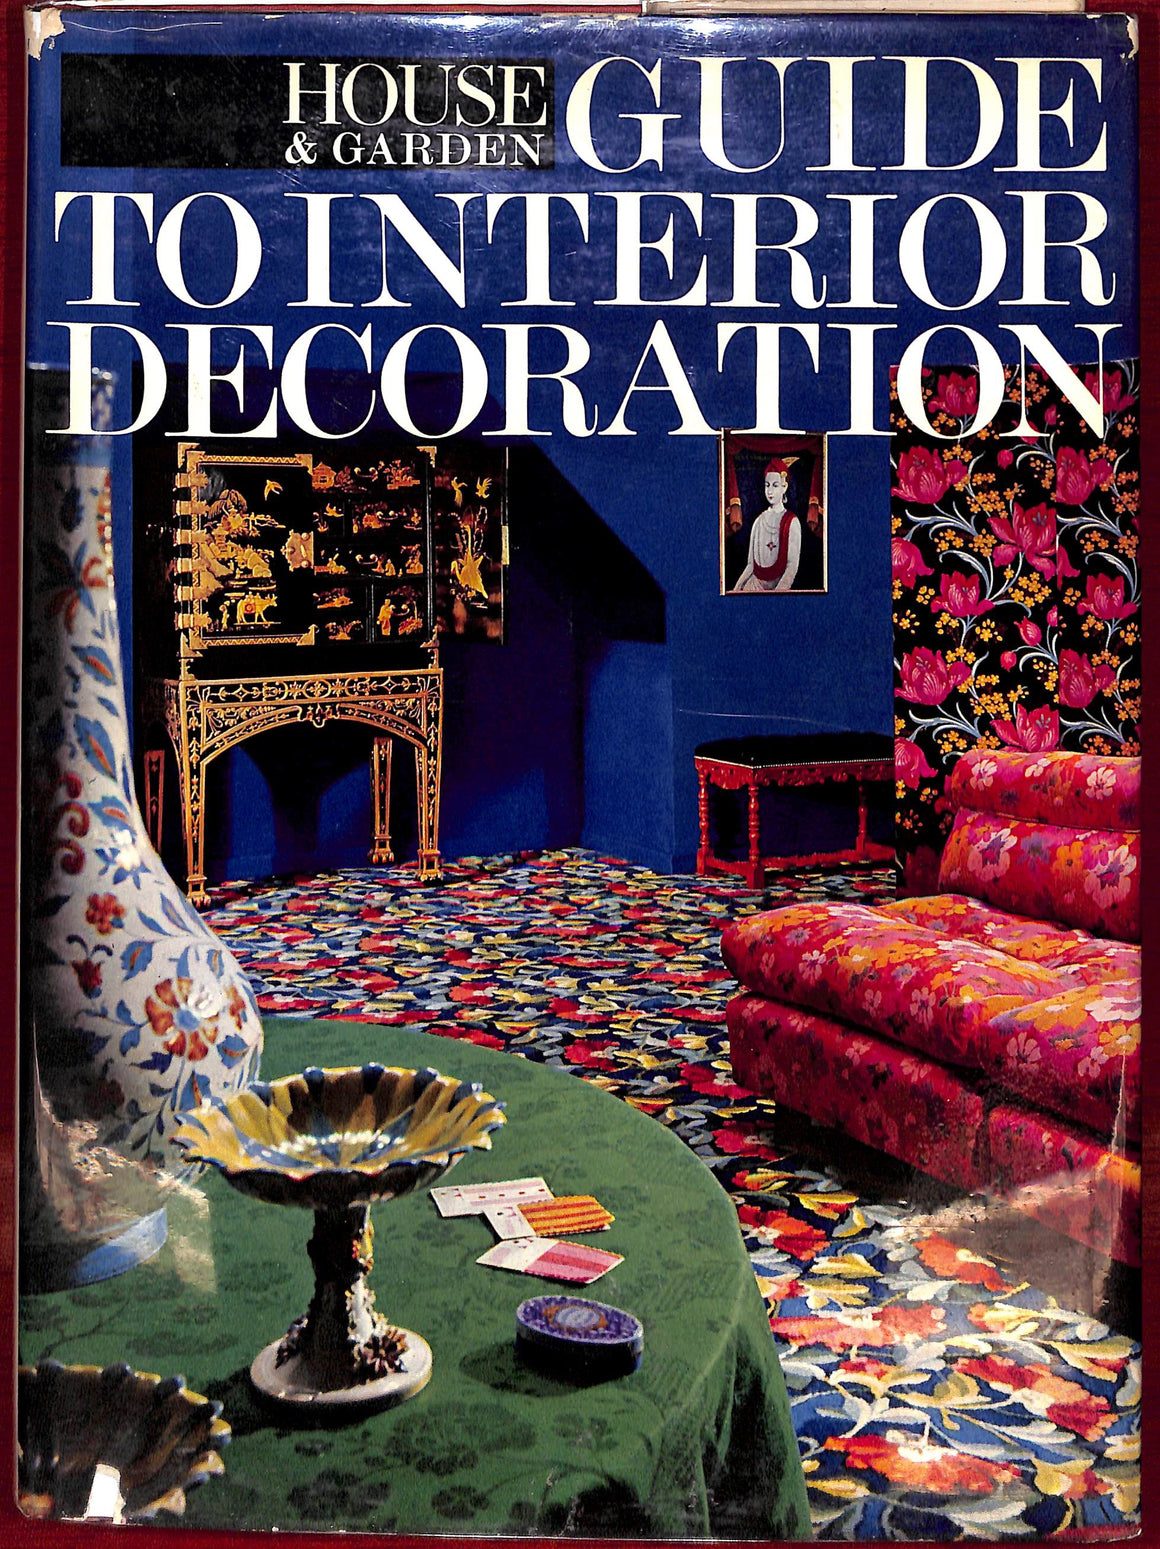 "House & Garden: Guide To Interior Decoration" 1967 HARLING, Robert [editor] (SOLD)